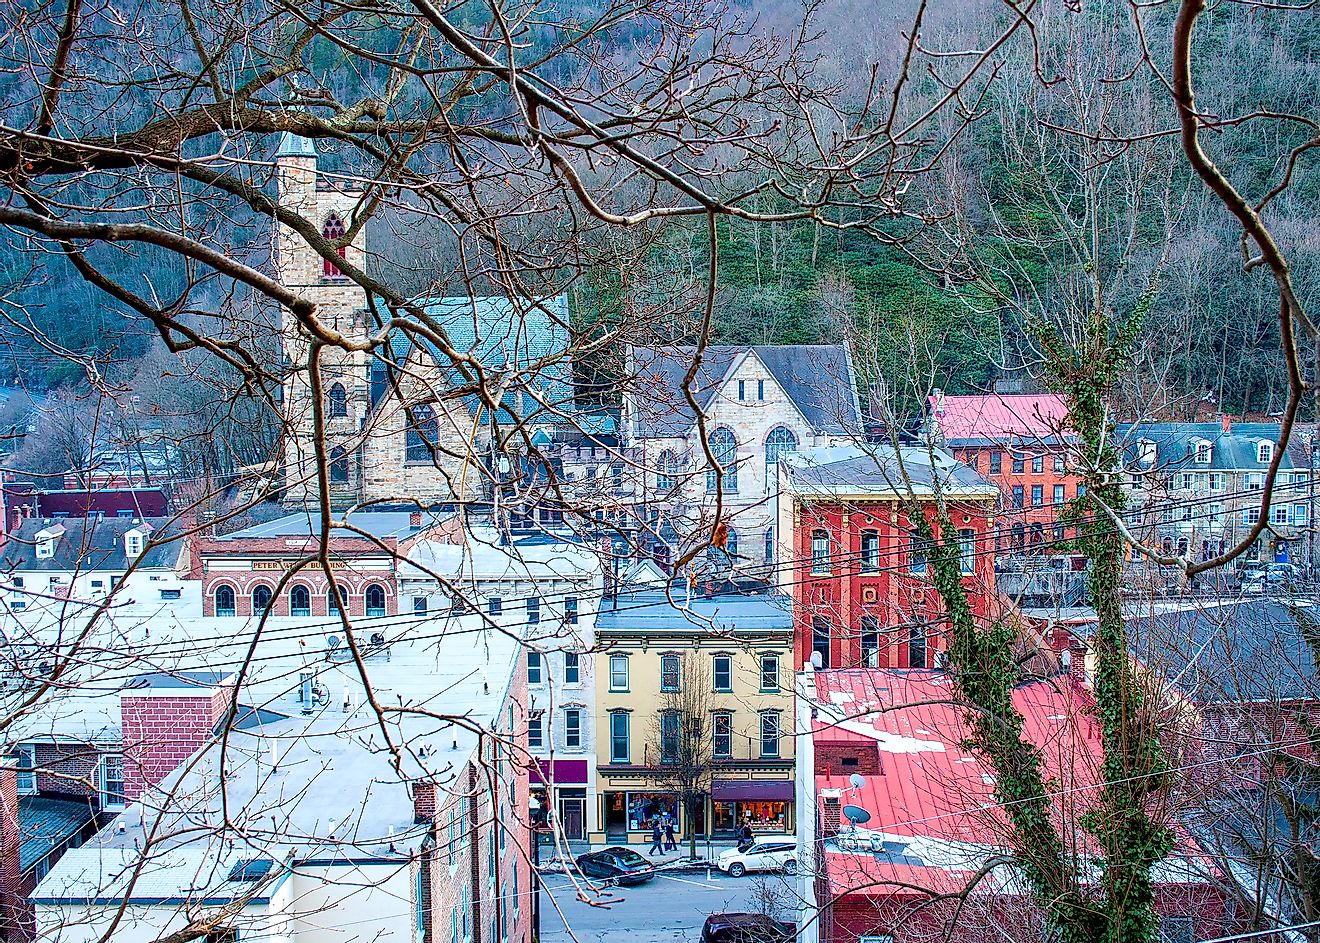 The charming town of Jim Thorpe, Pennsylvania, in winter.